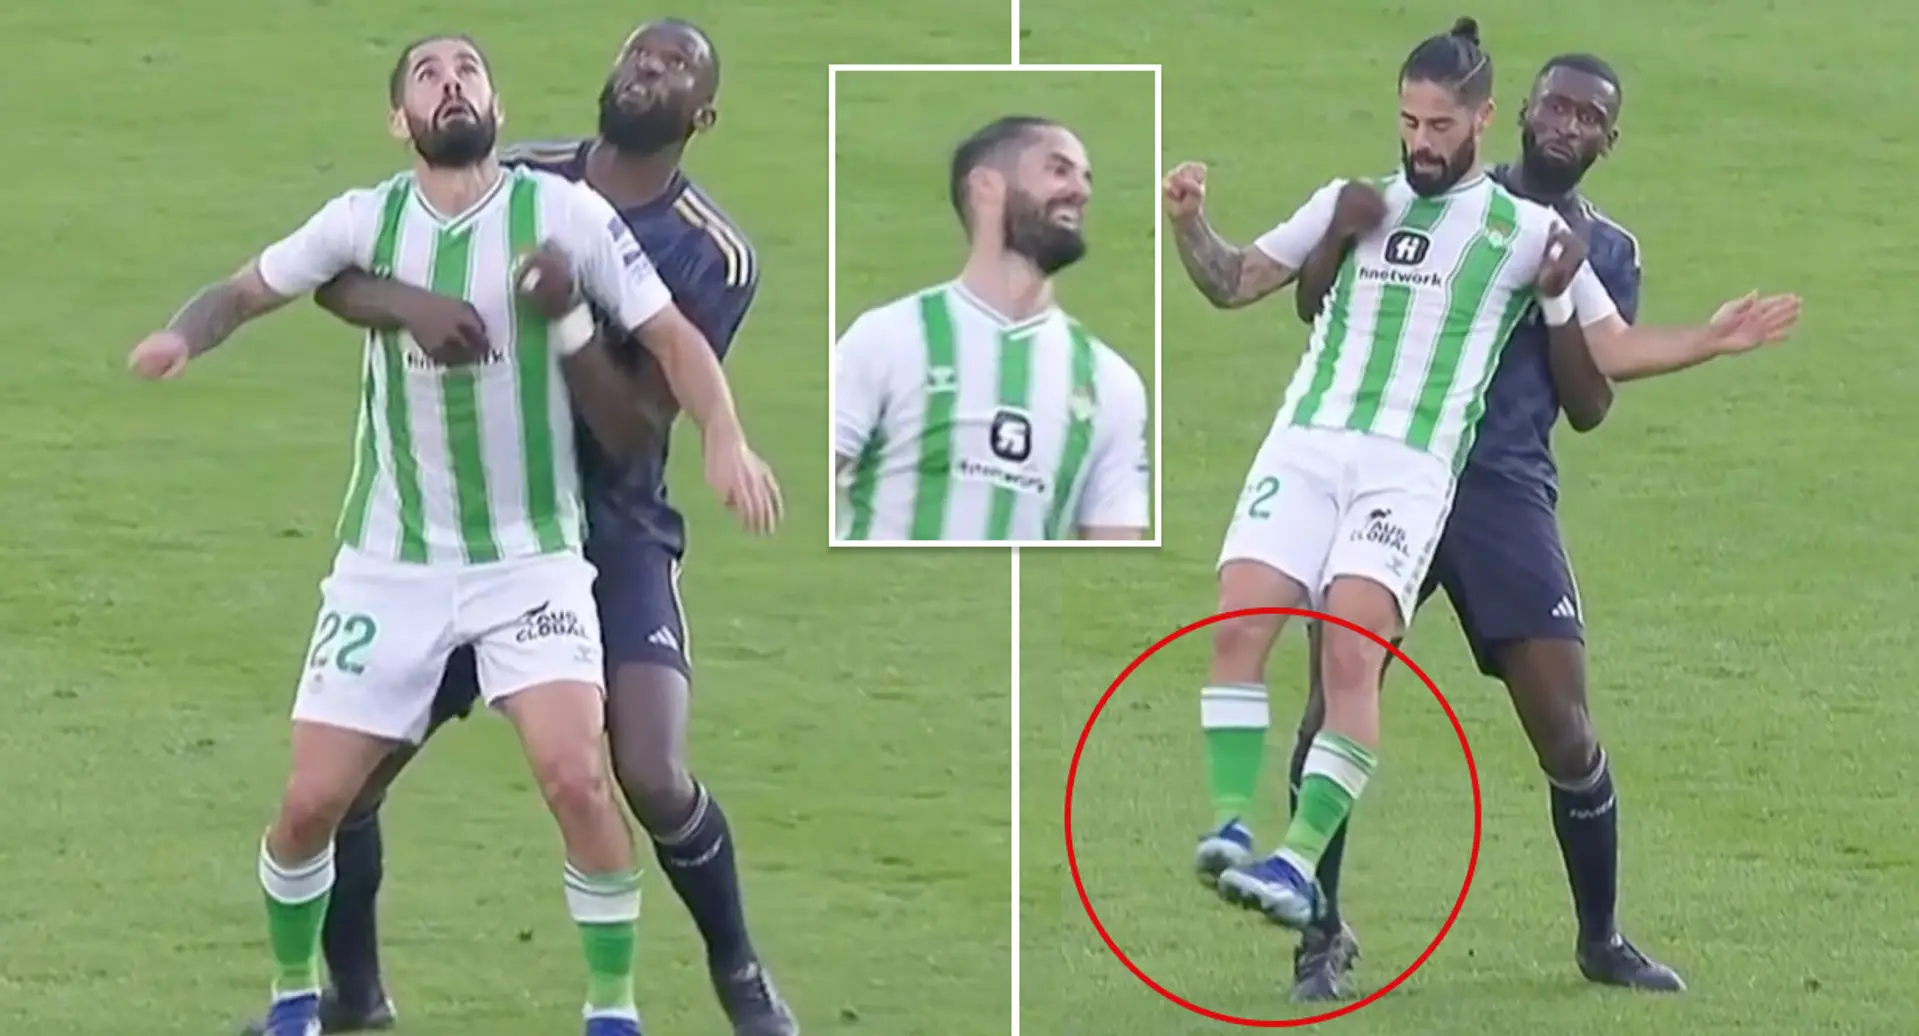 Spotted: Rudiger lifts Isco off the ground — what happens next